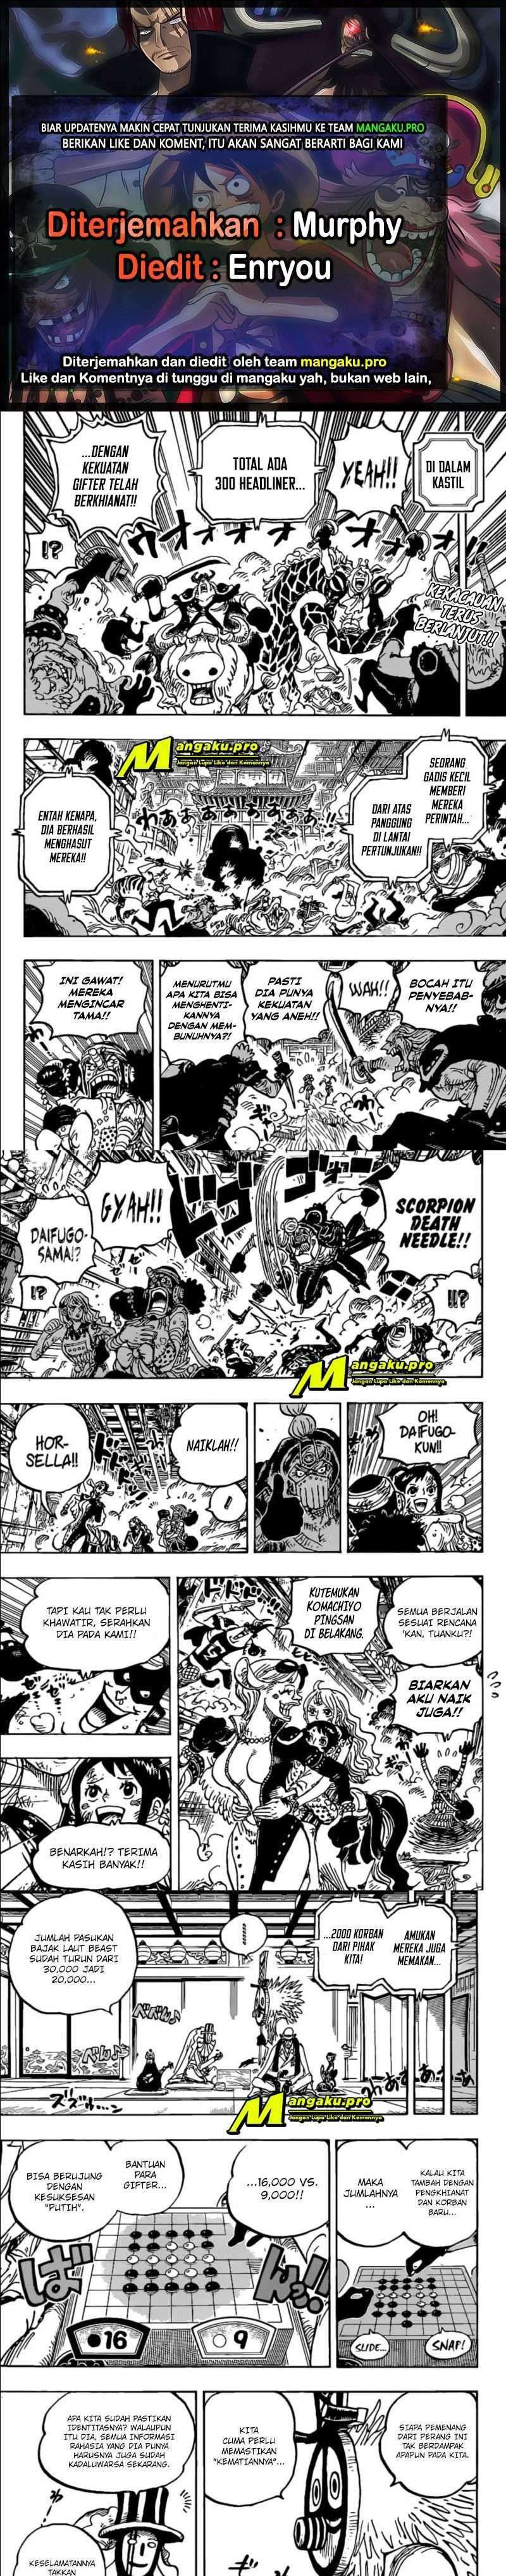 One Piece Chapter 1018